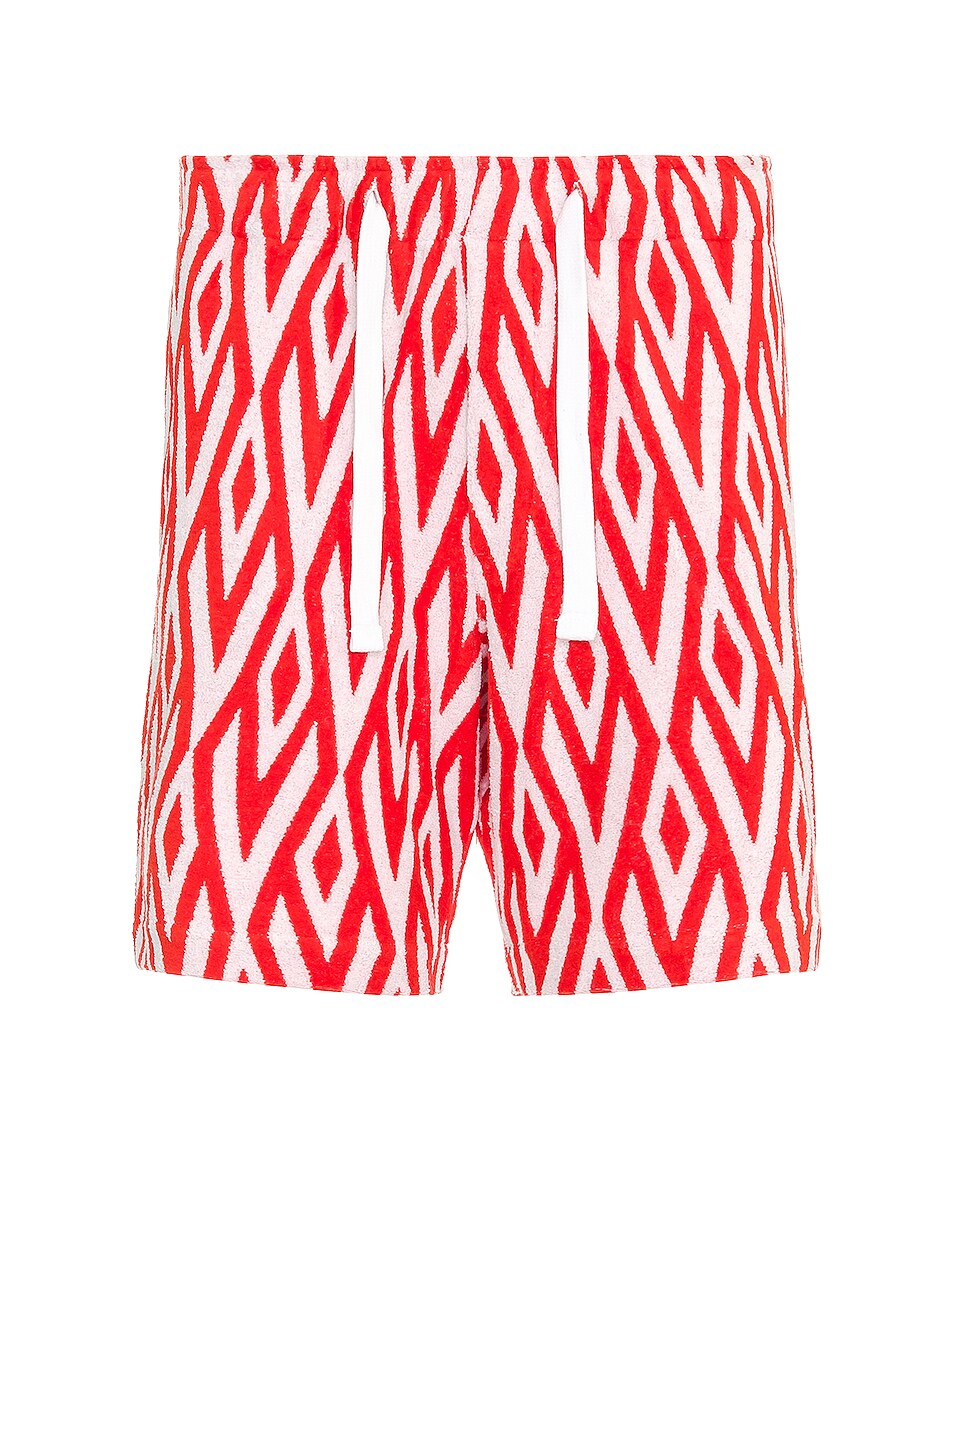 Image 1 of Orlebar Brown Trevone Cano Jacquard Shorts in Summer Red & White Sand